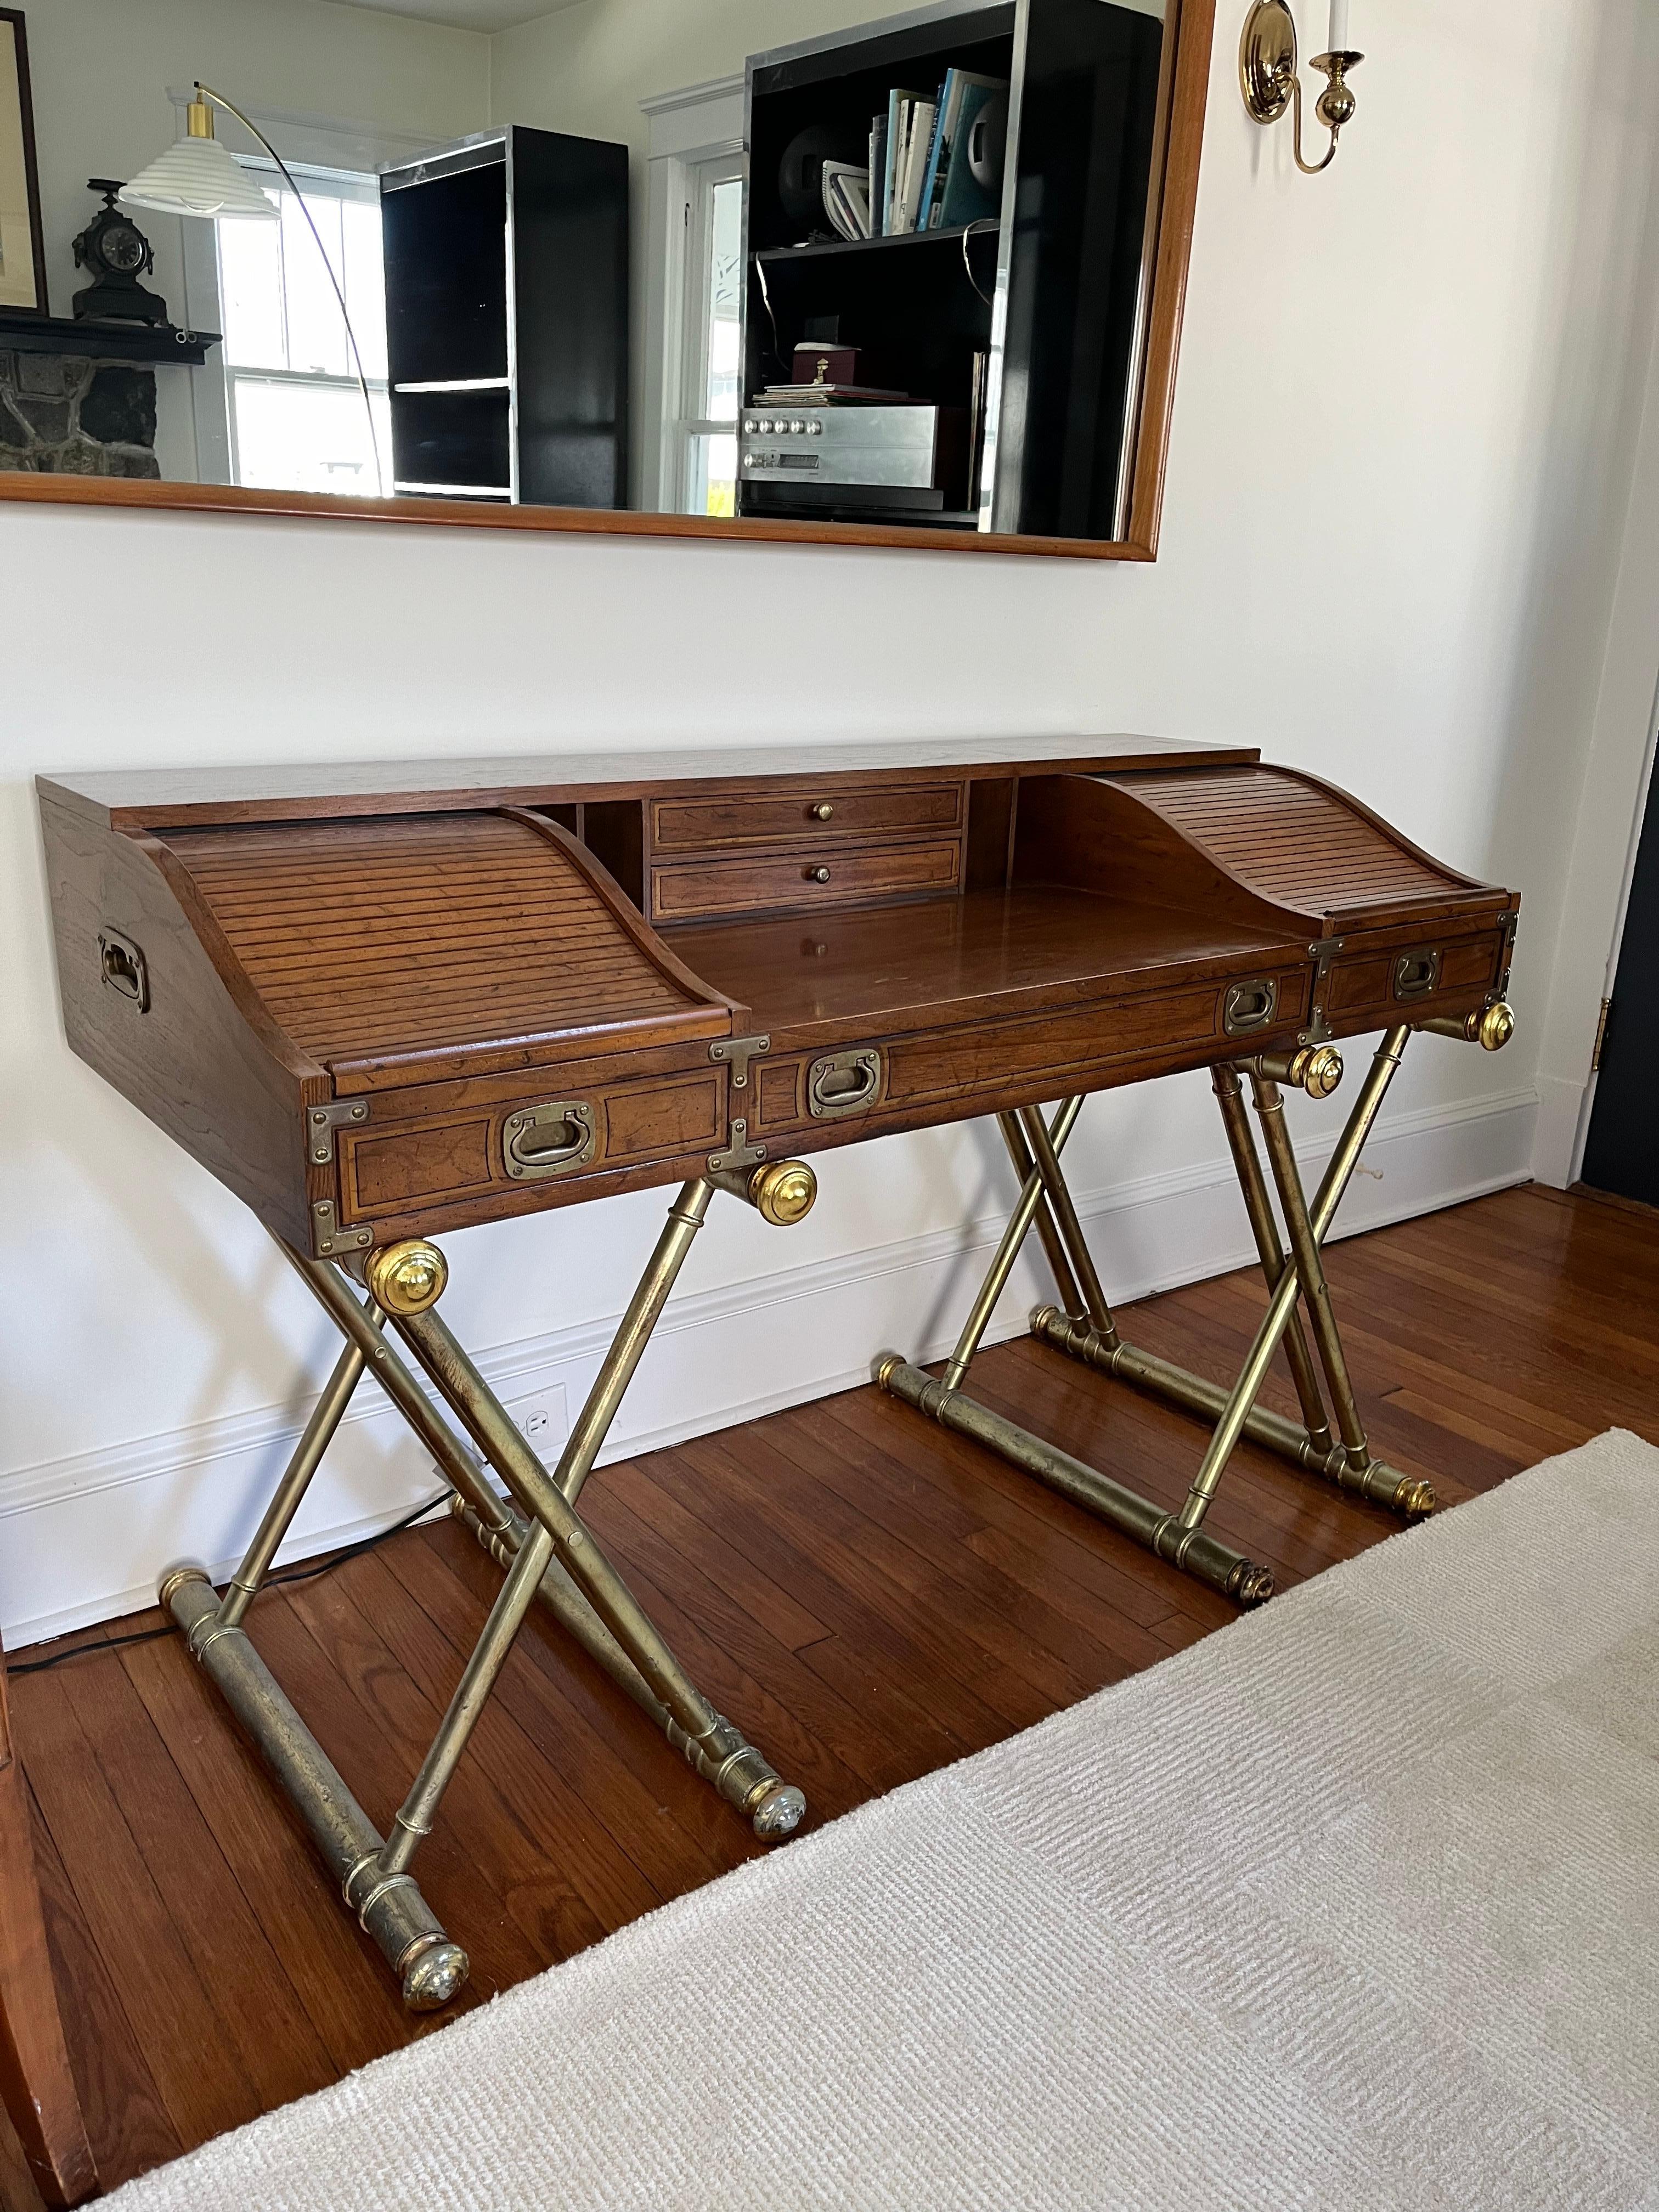 Campaign style desk designed by John Van Koert for Drexel. The desk is supported by gold crossed wood supports with a gilt finish. The top portion offers cubby-hole storage on either end which is hidden beneath rolling tambour doors. Behind the